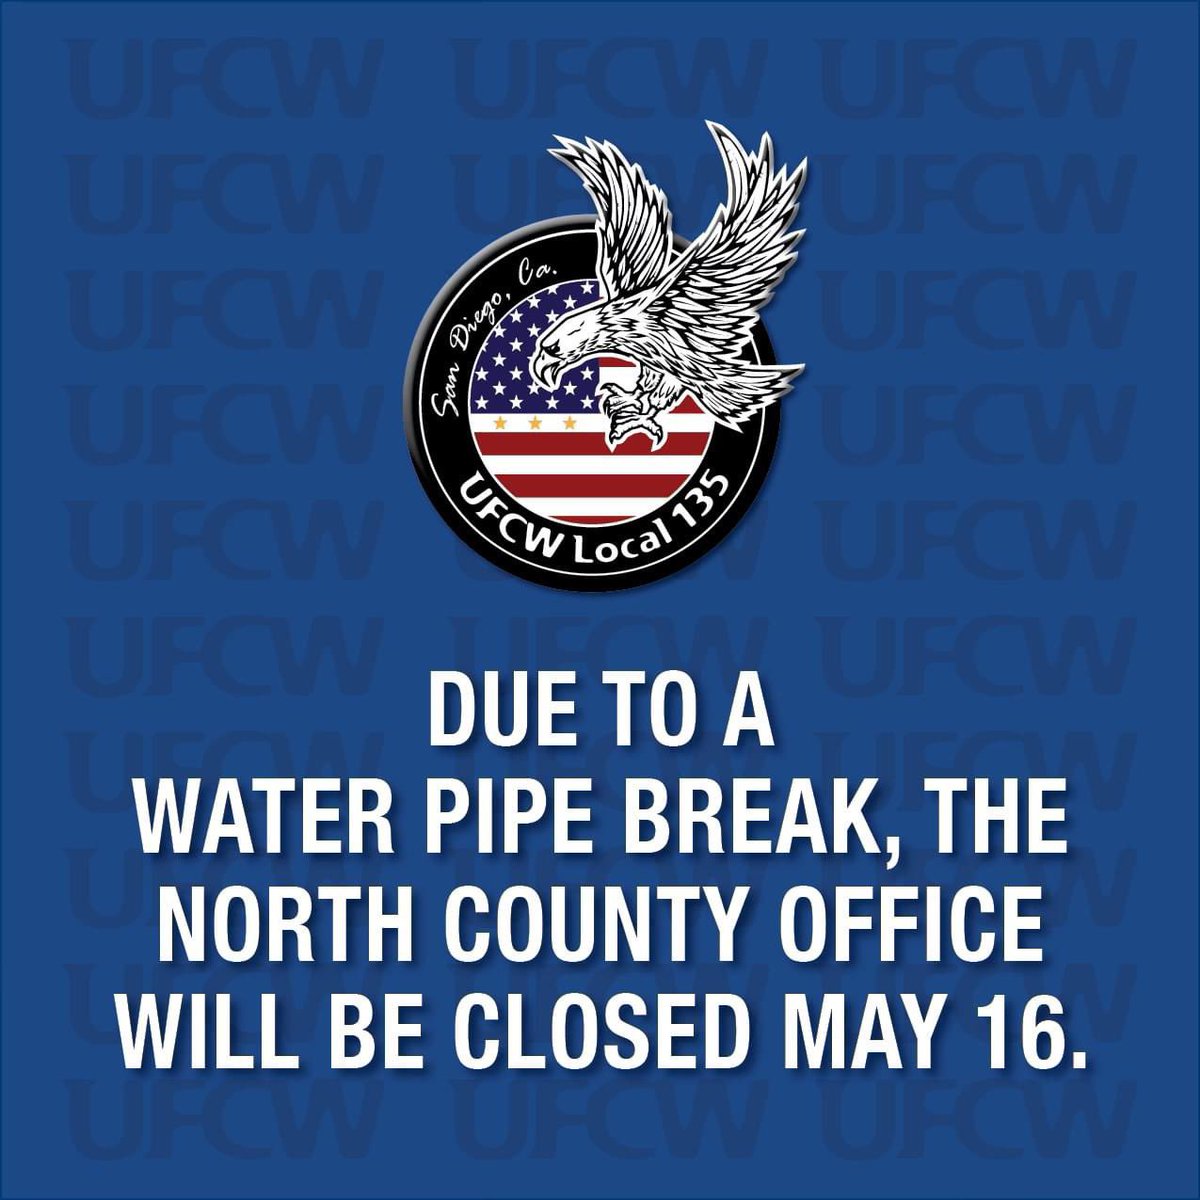 Our San Marcos office is closed today due to a water pipe break in the street. A city crew is on site working on the problem. Most union business can be handled over the phone at 619.298.7772 or you can visit our Mission Valley office. We apologize for the inconvenience.